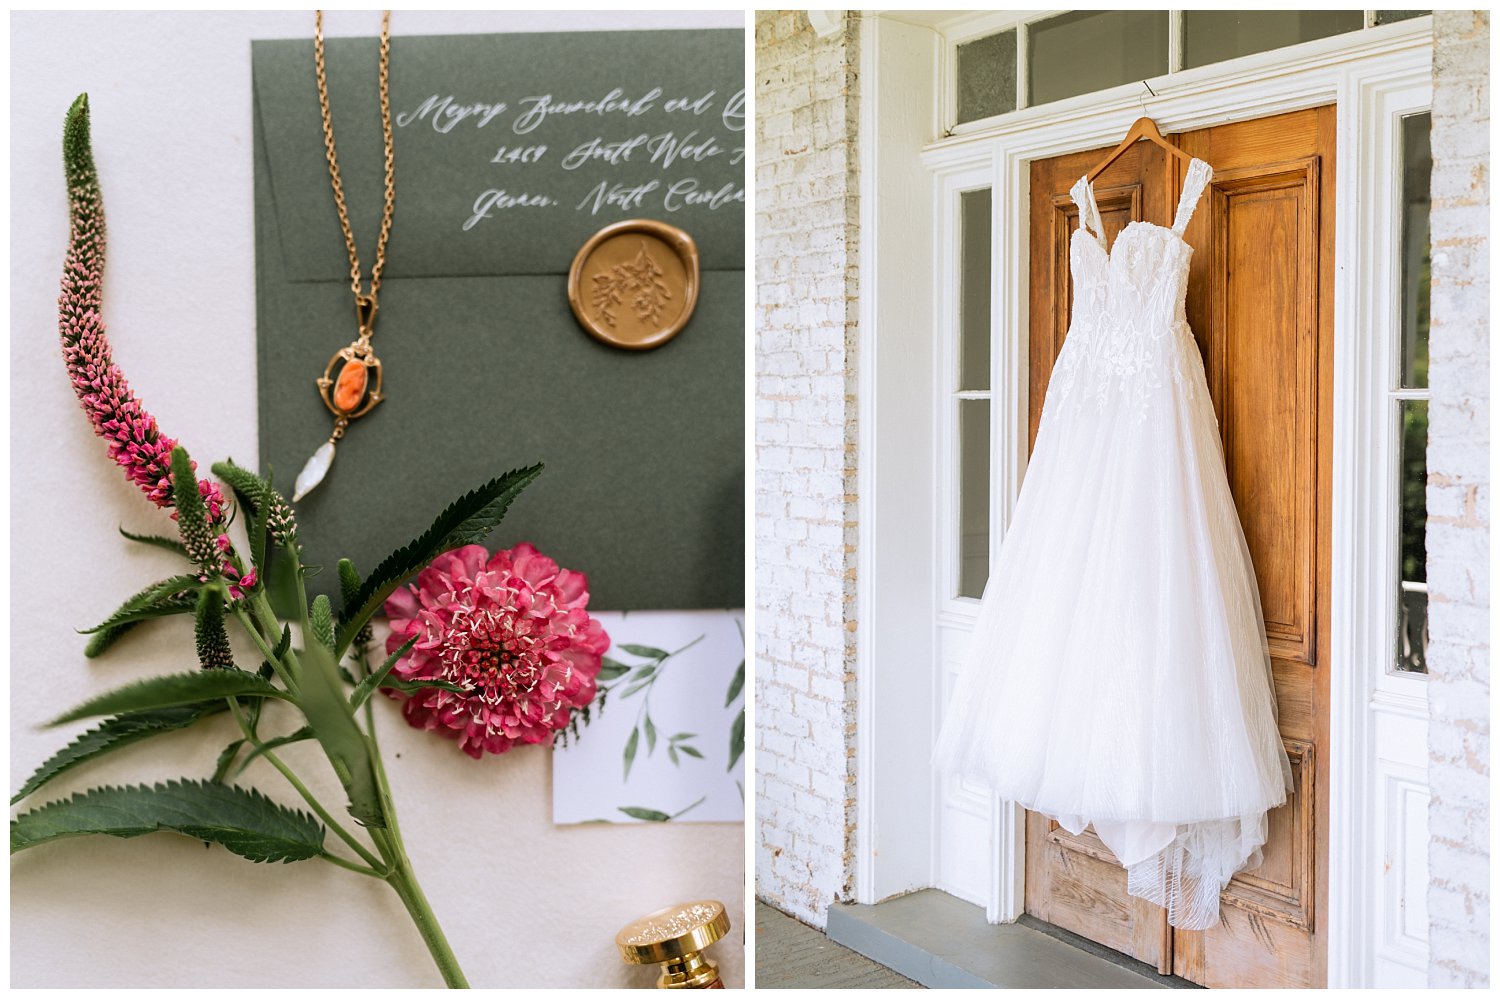 Wedding gown and invitation suite for summer wedding in Charlottesville